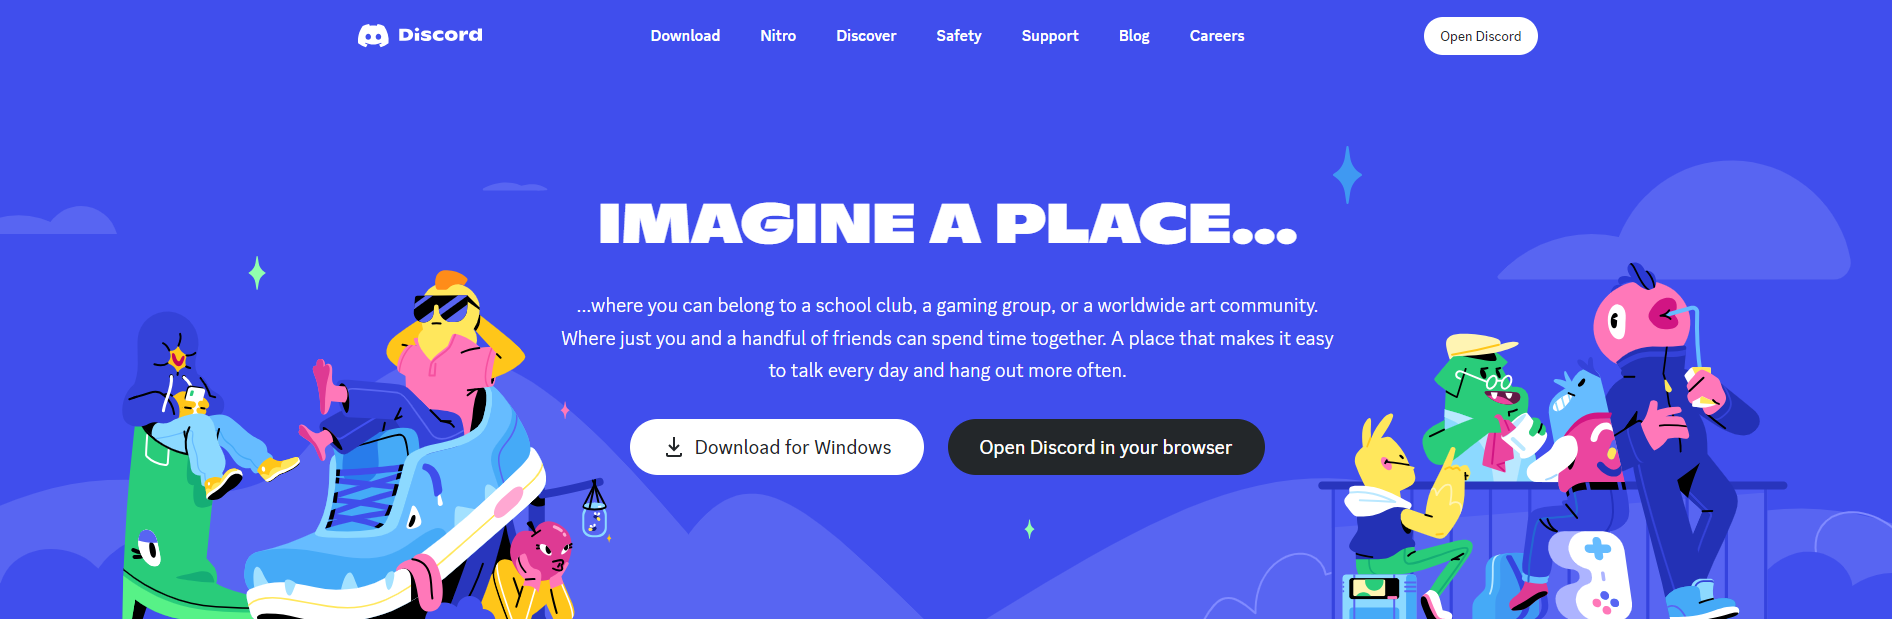 The Discord home page.  - Image Source: https://discord.com/